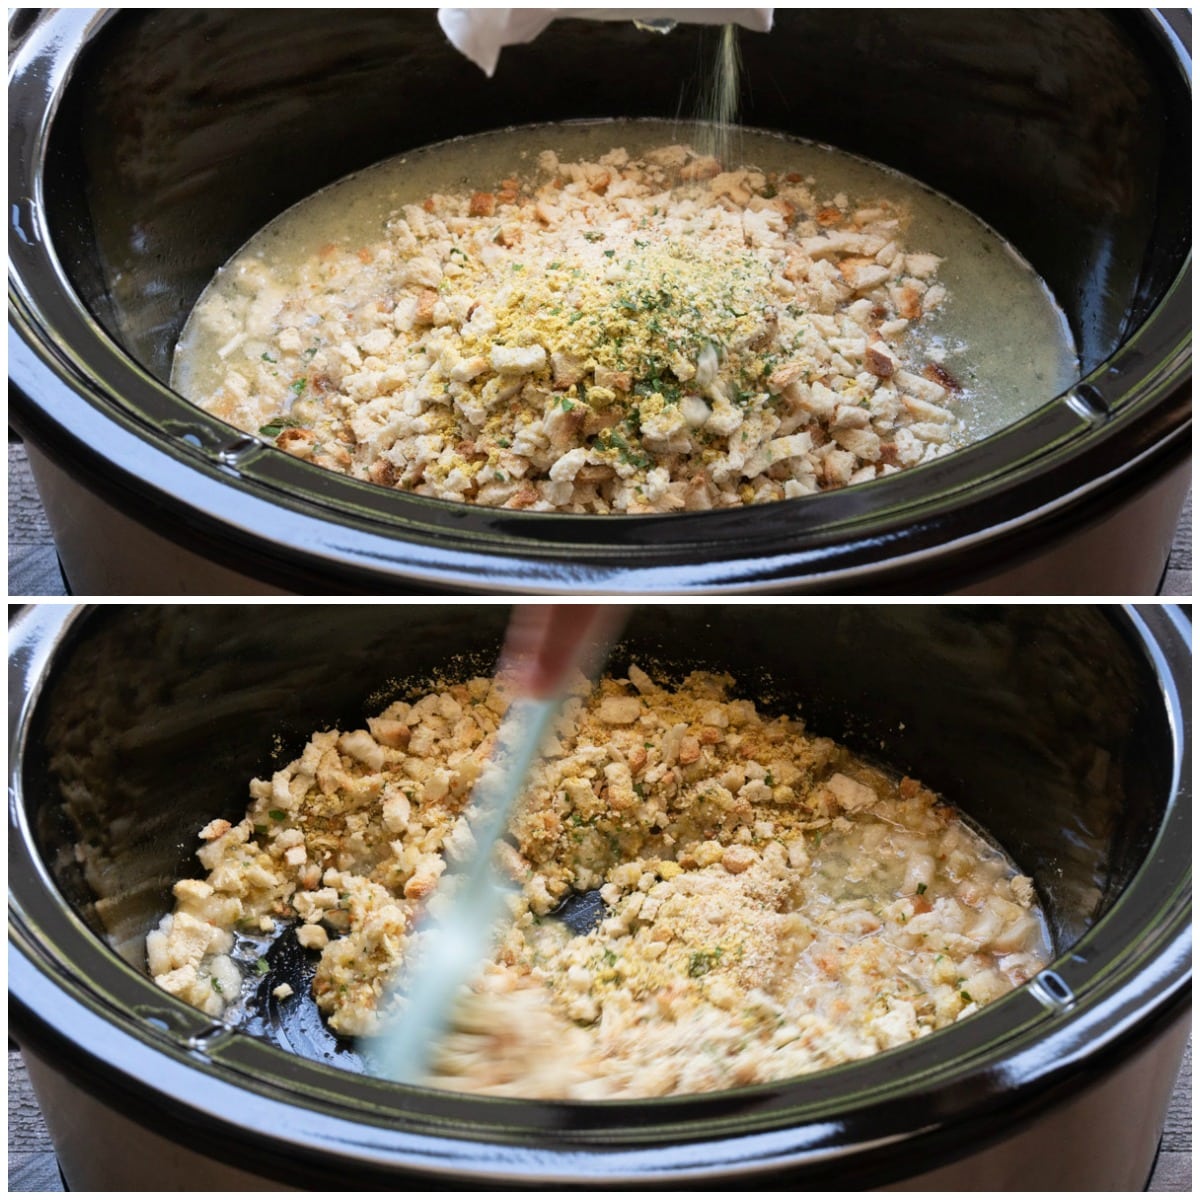 2 image collage. Top image is stuffing being poured into a slow cooker. Bottom, spatula stirring stuffing.